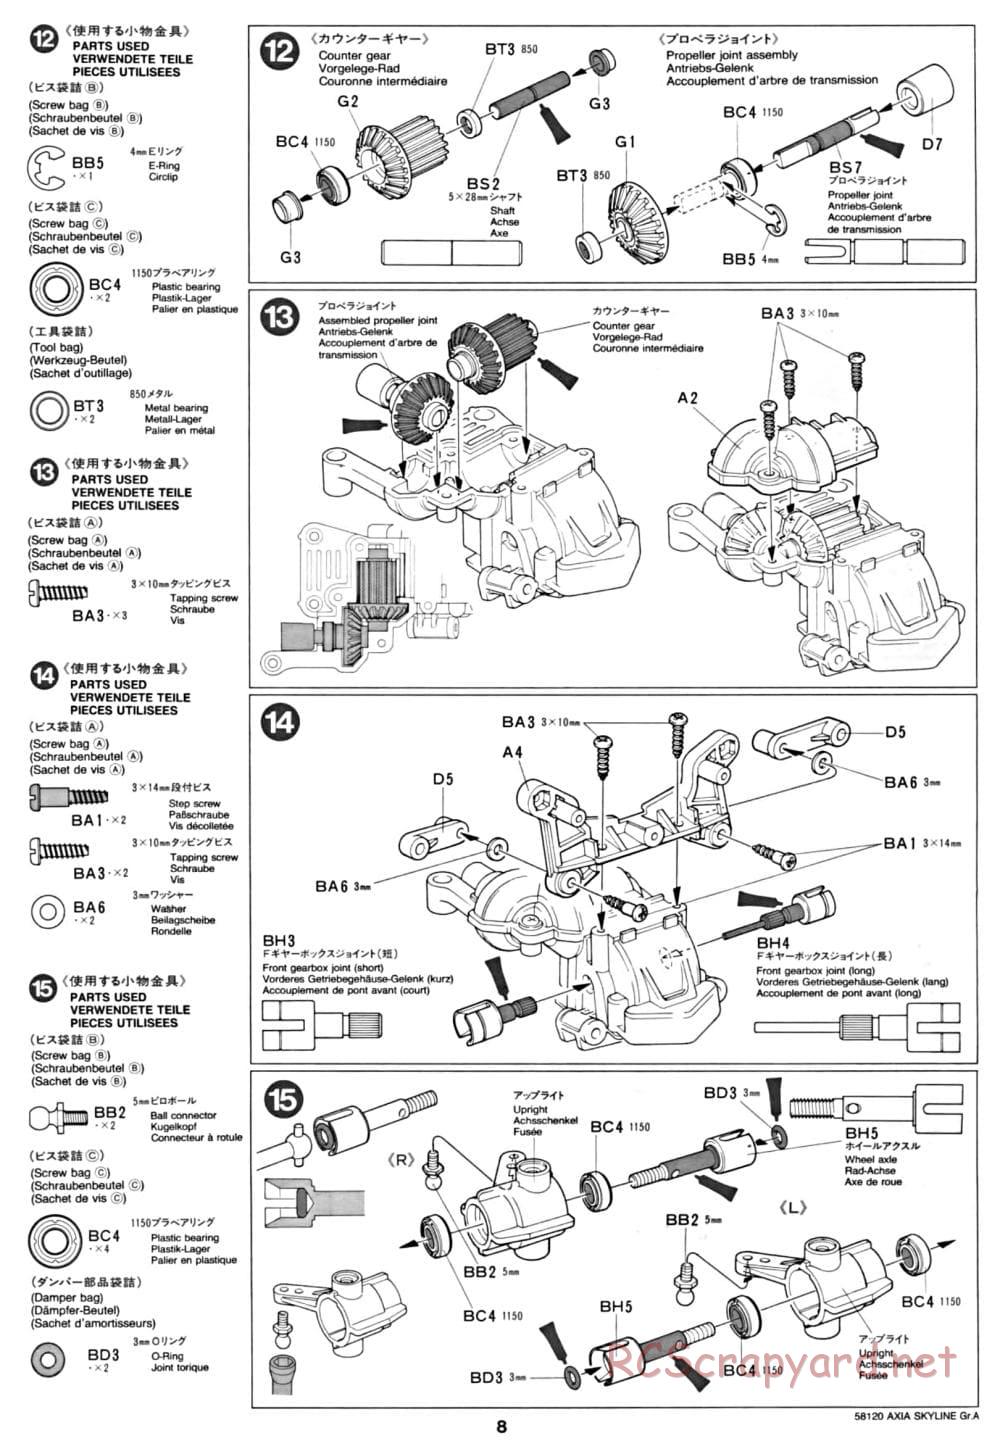 Tamiya - Axia Skyline GT-R Gr.A - TA-01 Chassis - Manual - Page 8